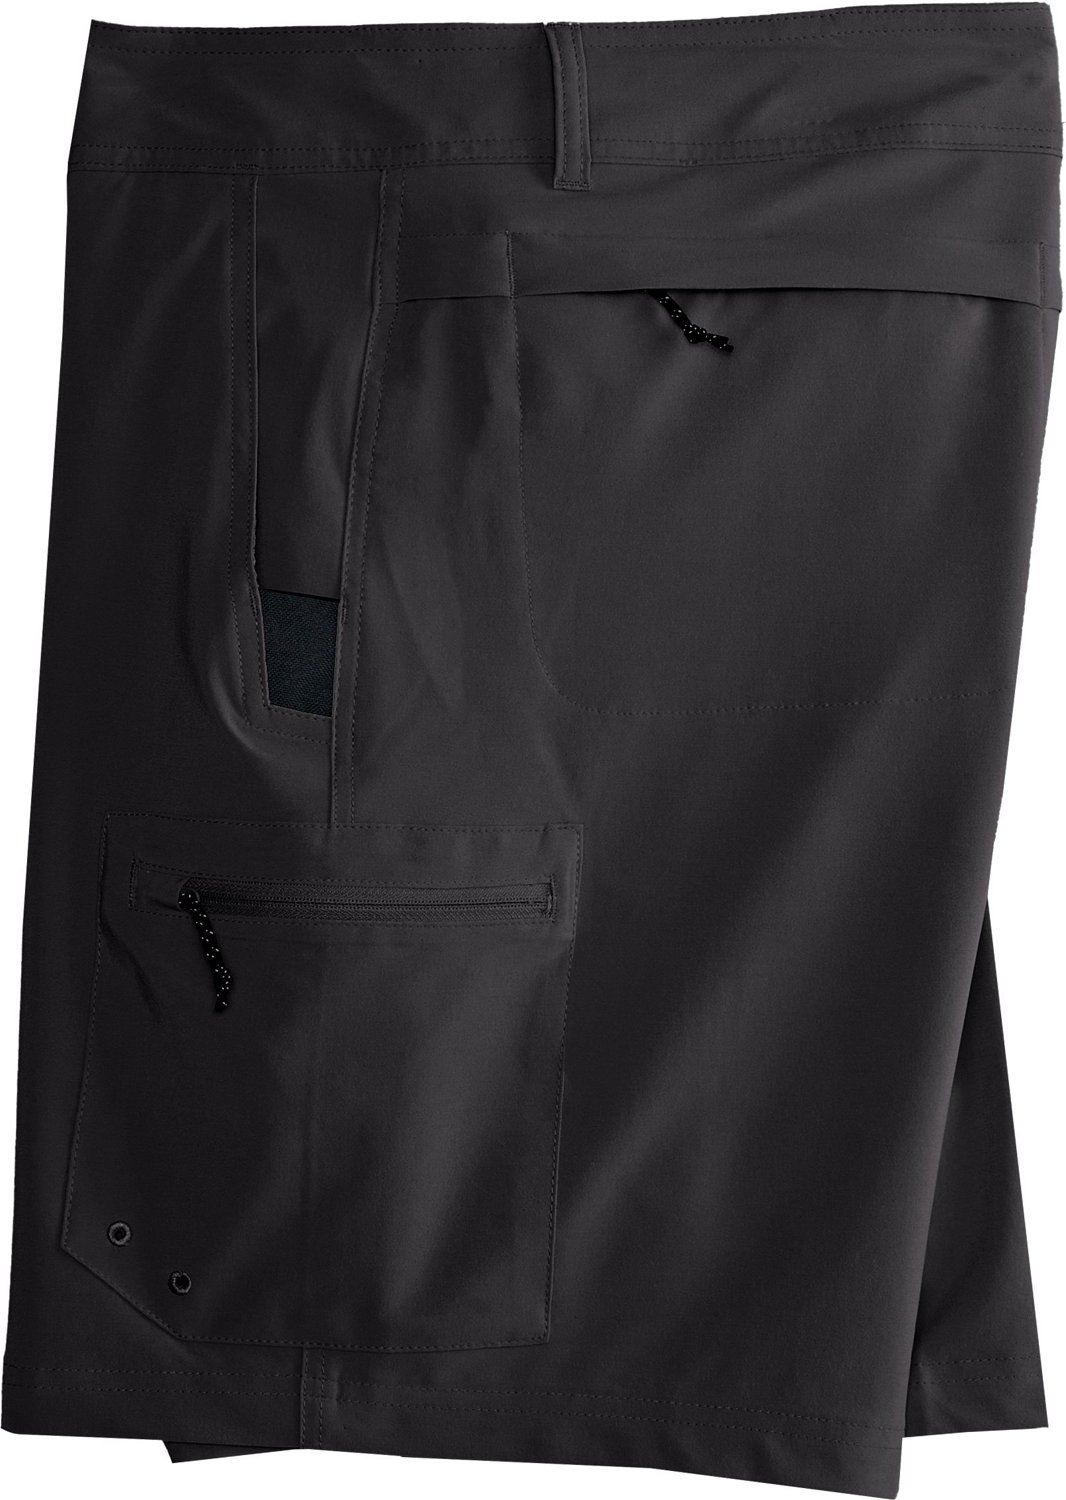 Magellan Outdoors Men's Pro Angler Hybrid Shorts 9 in                                                                            - view number 5